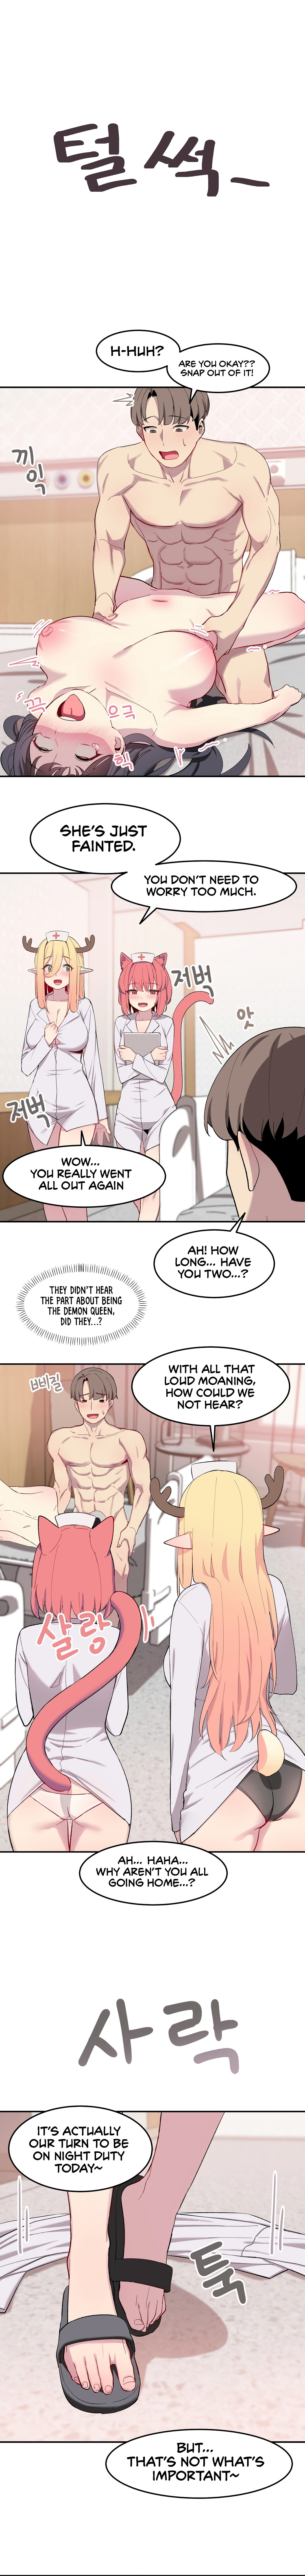 Hospitalized Life in Another World - Chapter 3 Page 14